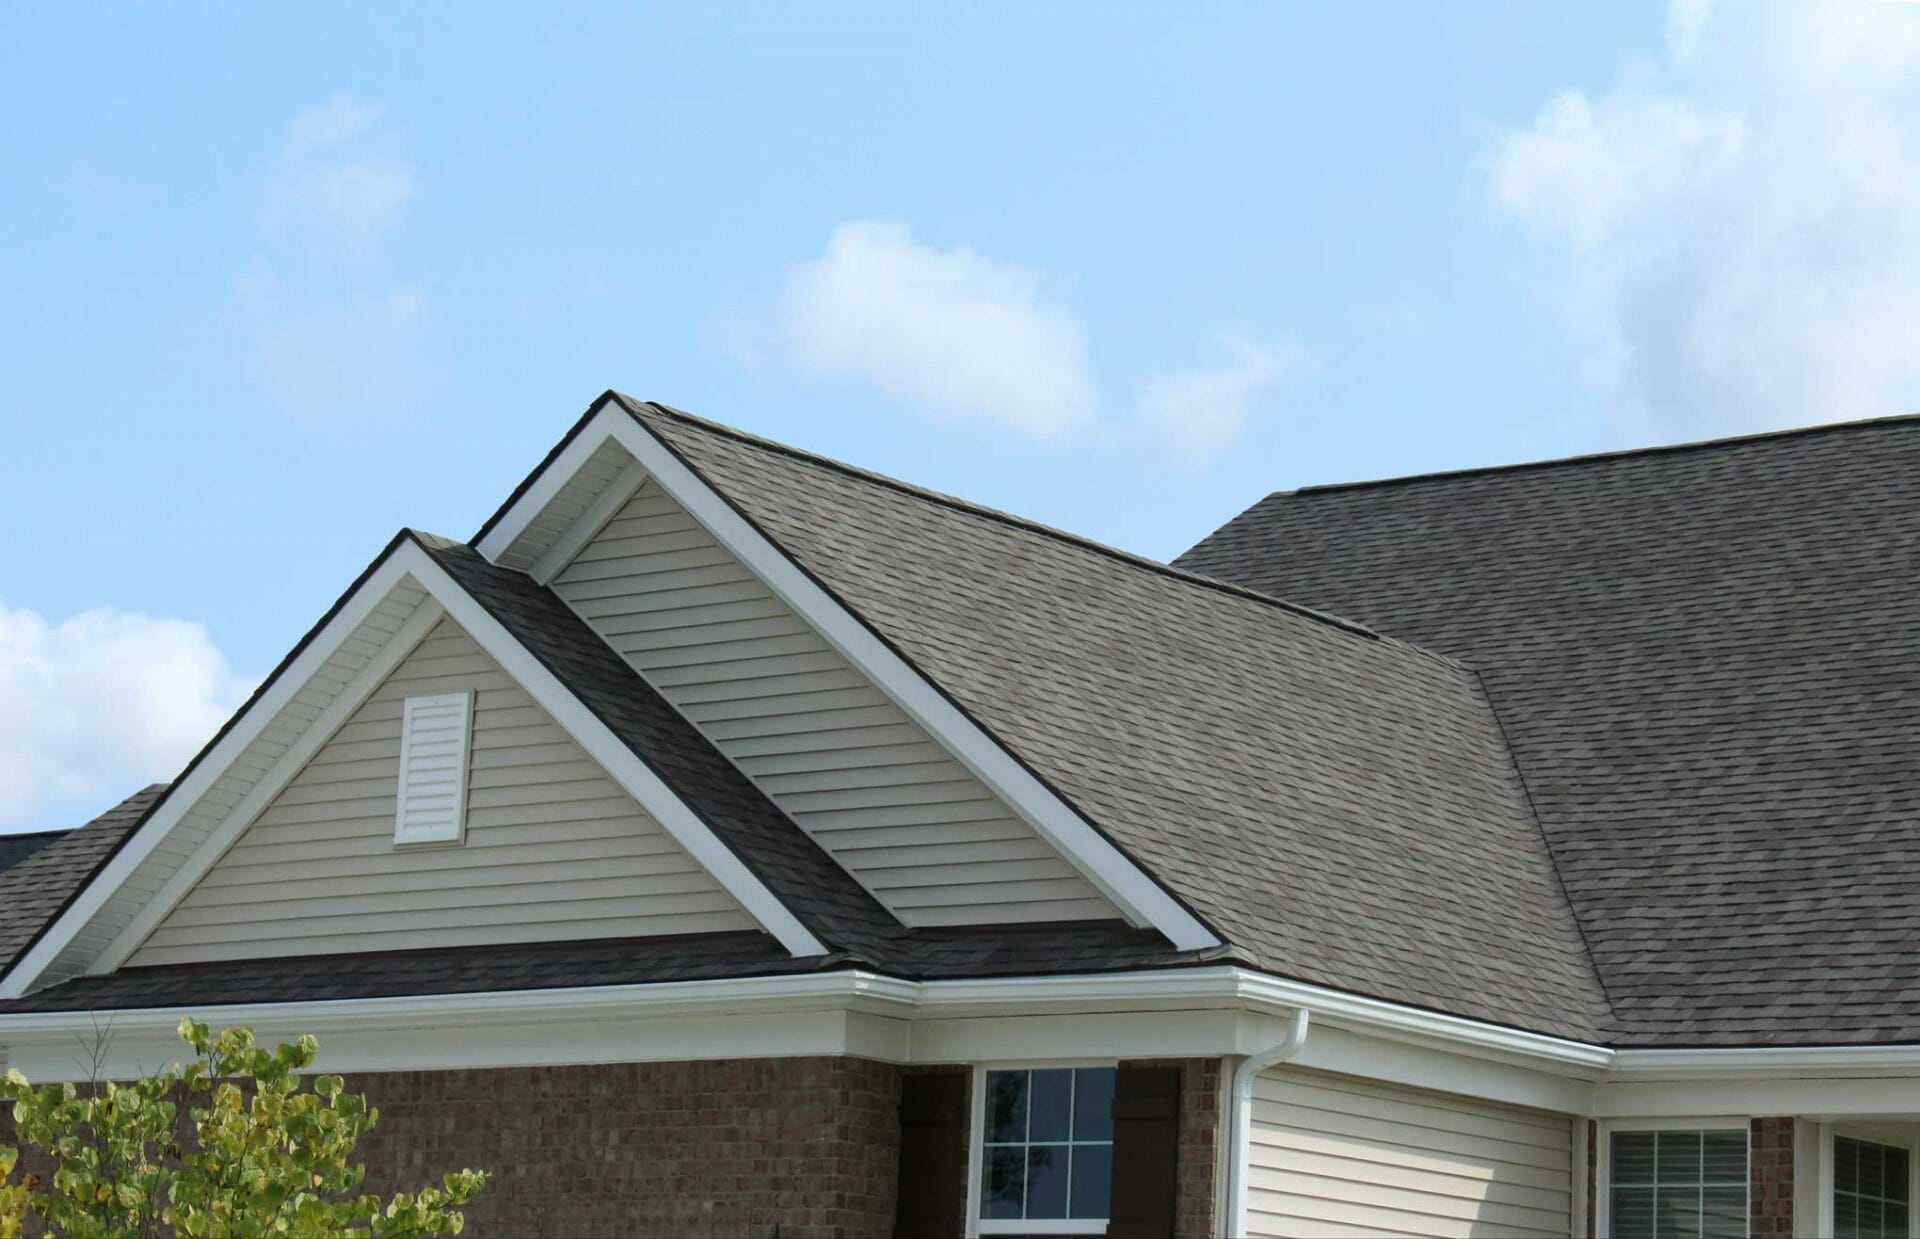 Gable roofing